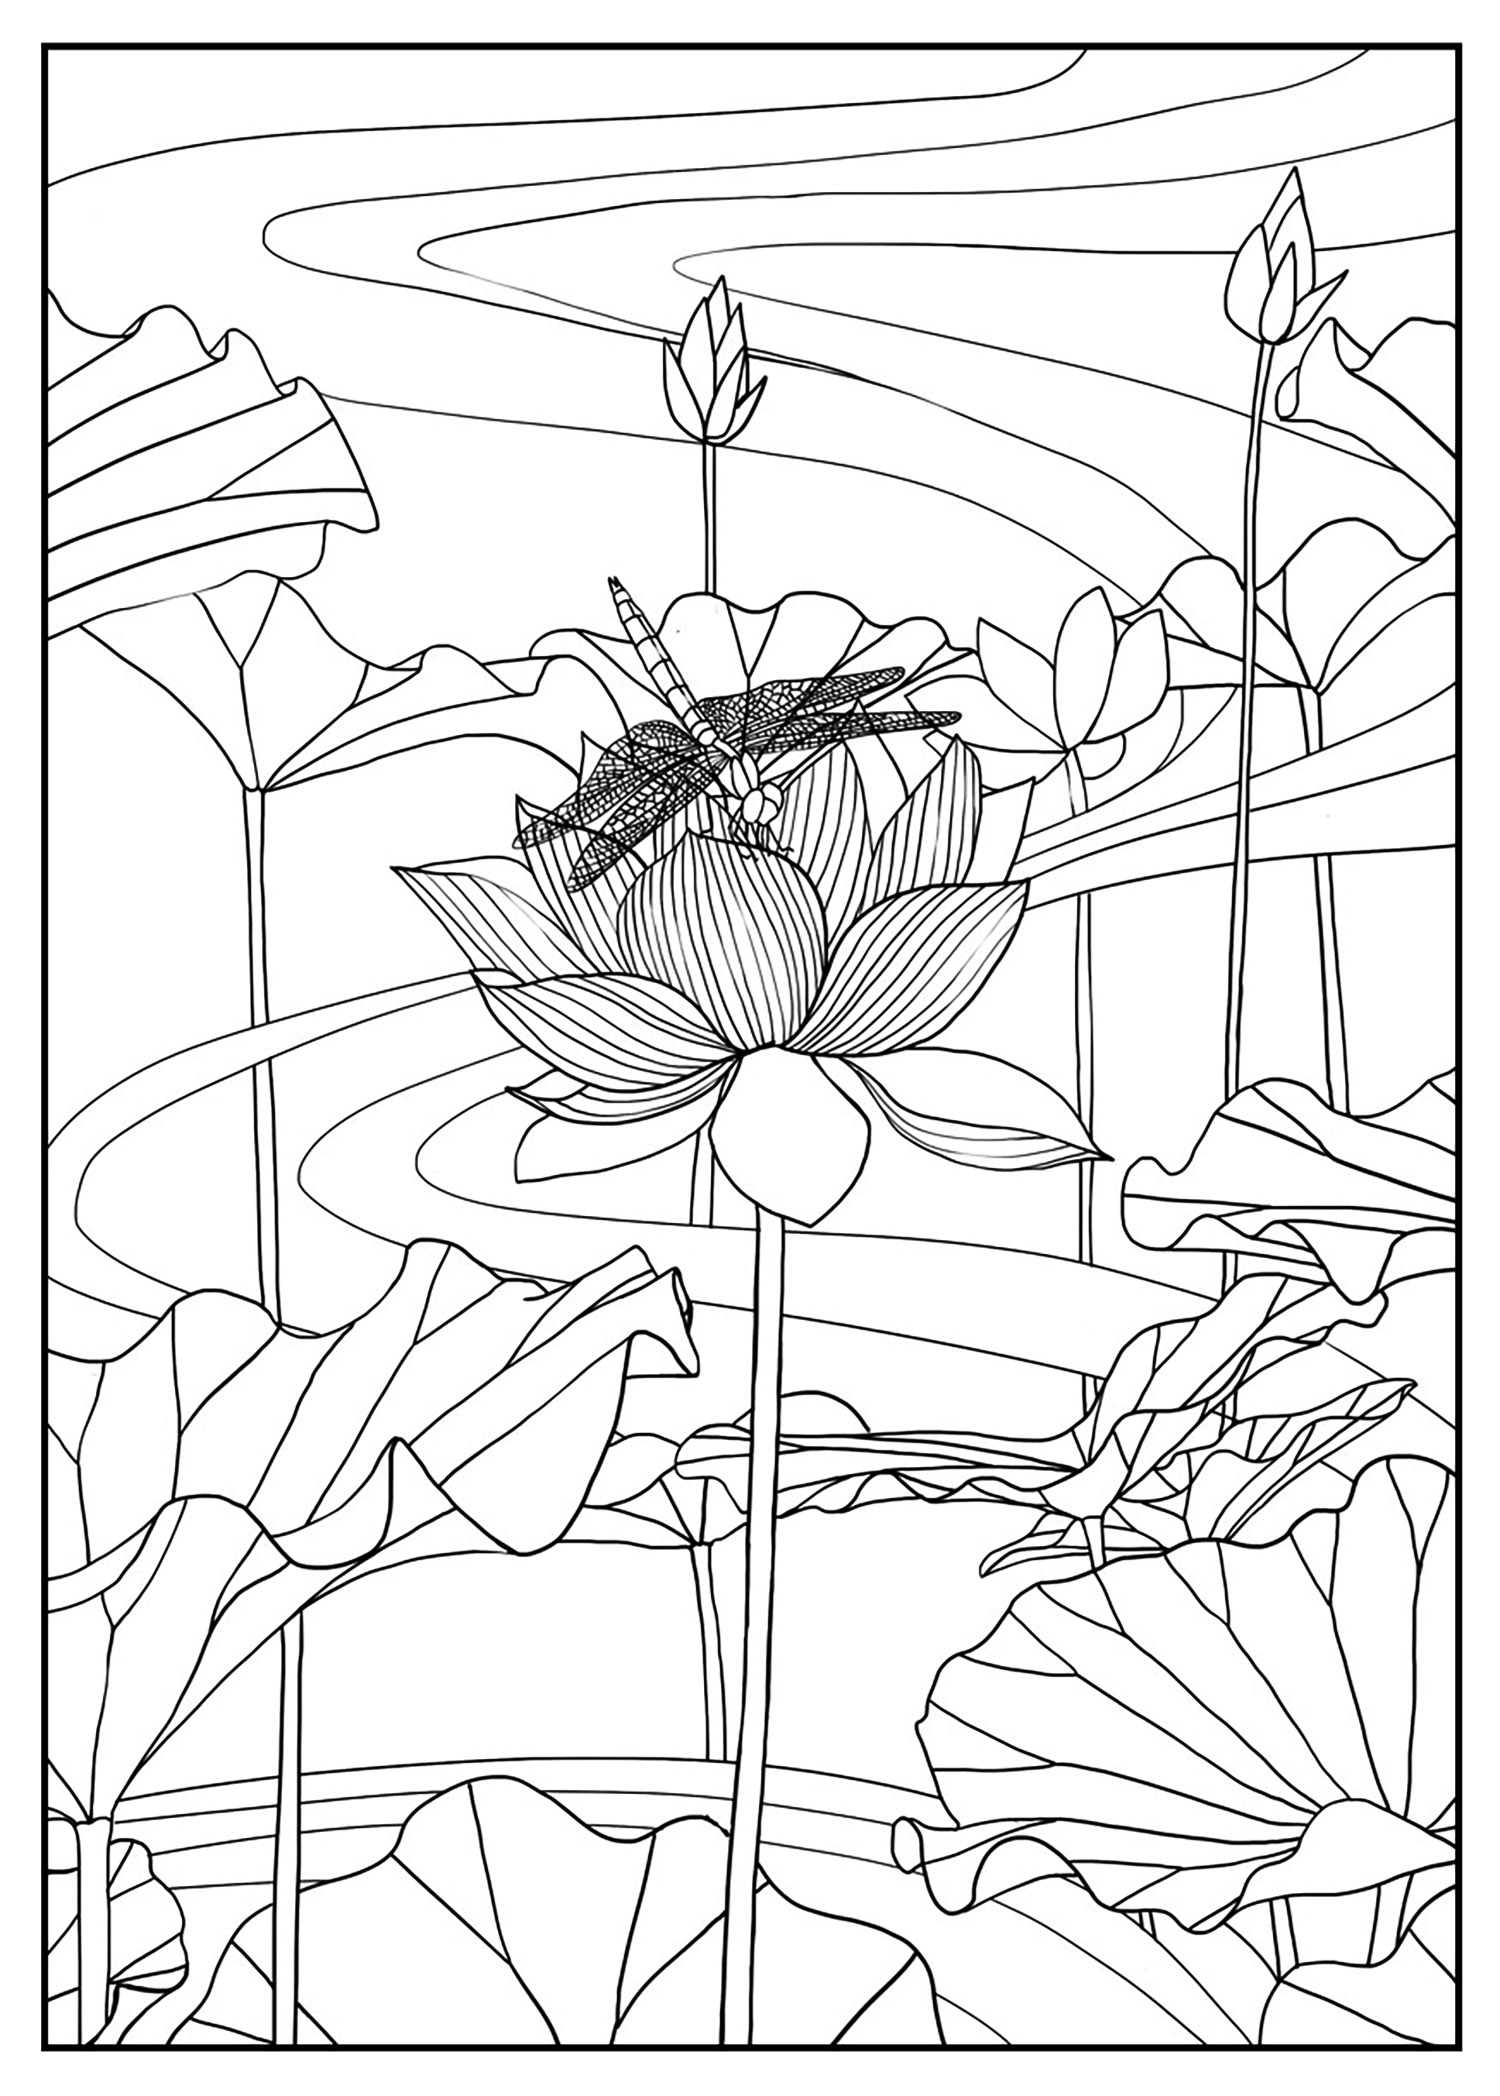 Download Lotus by mizu - Flowers Adult Coloring Pages - Page 2